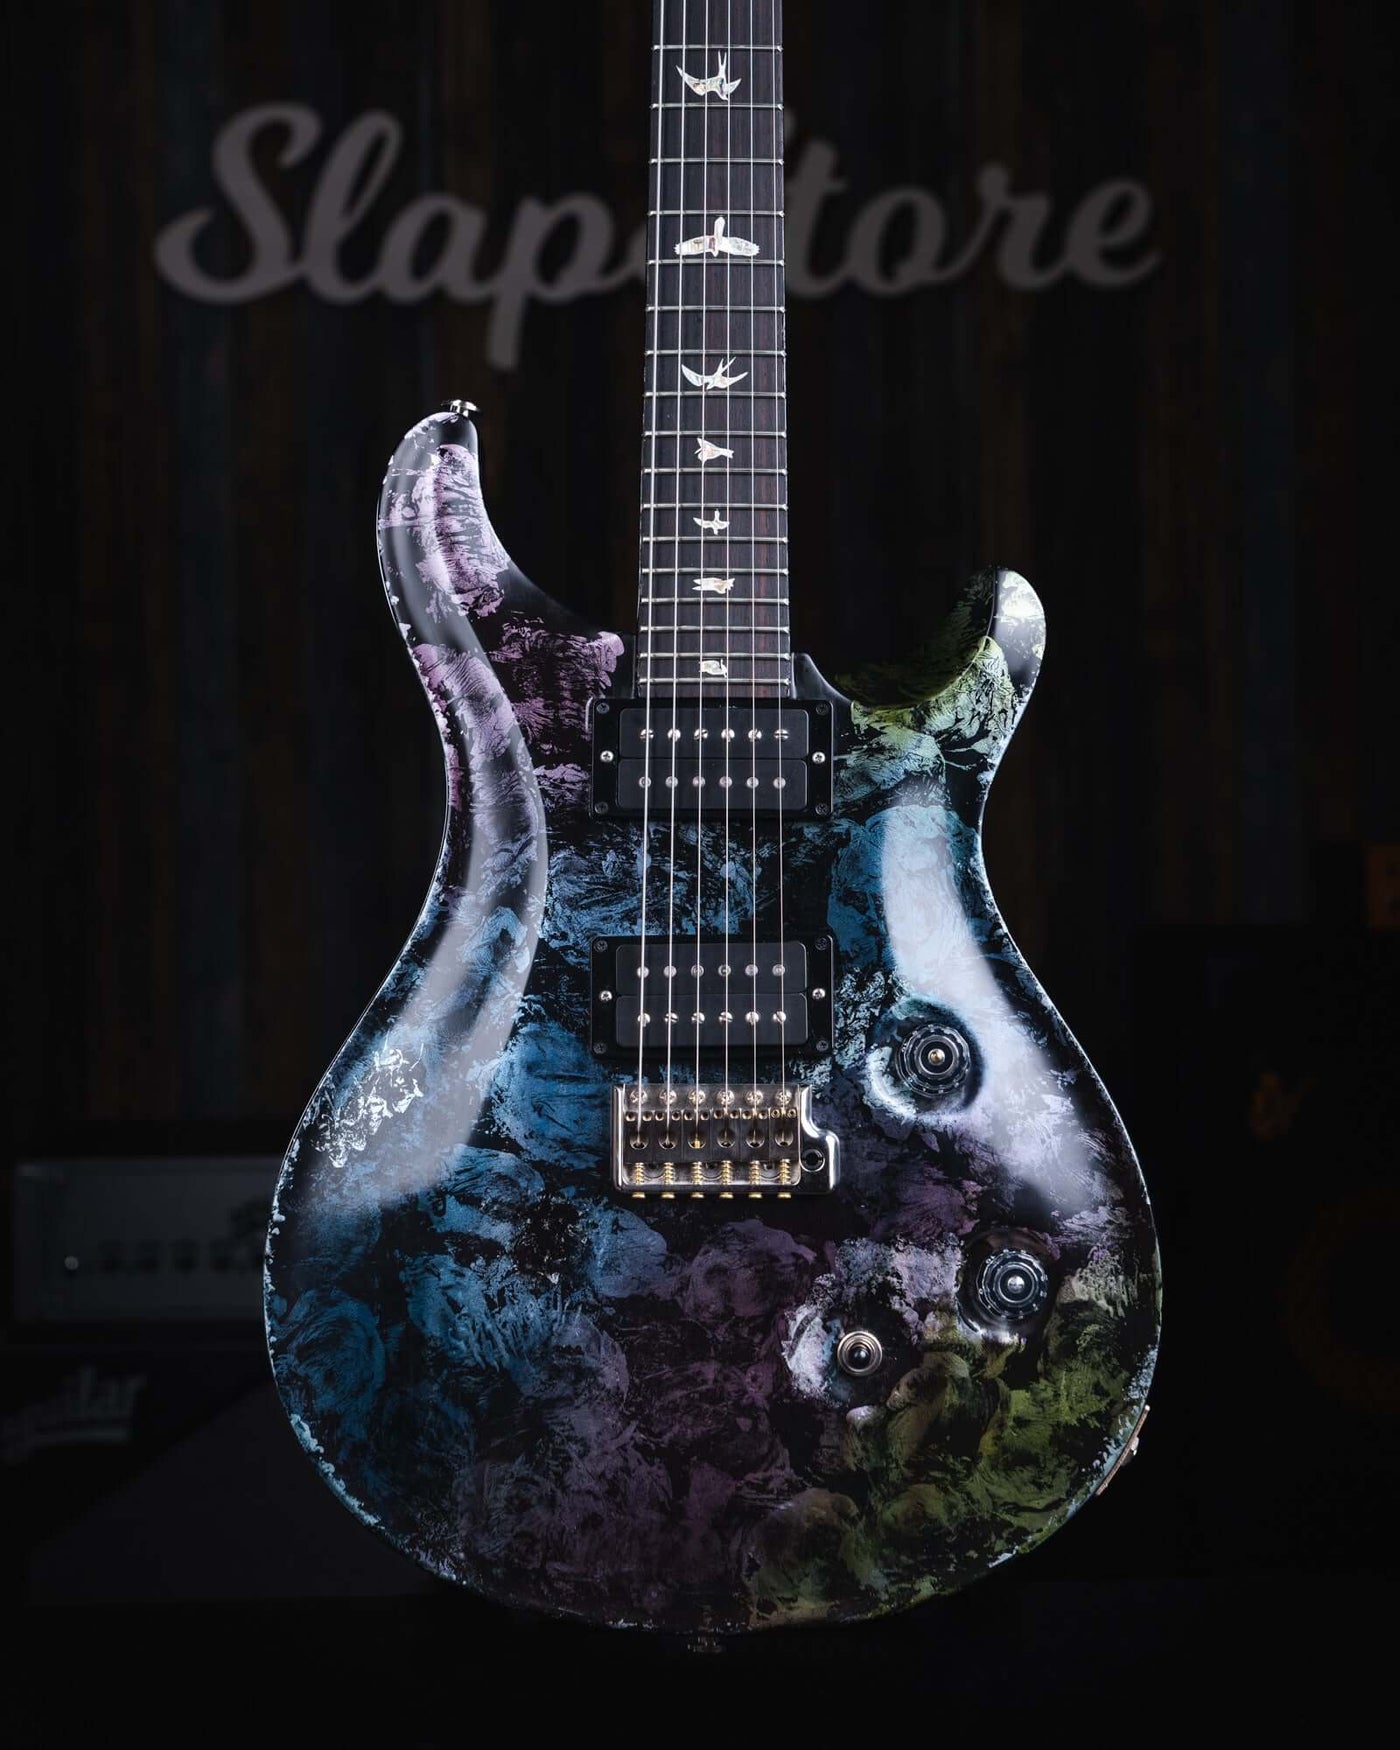 PRS Custom 24 Multifoil 2015 - $4599990 - Gearhub - The Custom 24 is the quintessential PRS guitar. This iconic instrument was the first model that Paul Reed Smith brought to the public at PRS Guitars’ first Winter NAMM show in 1985 and has been a top seller ever since. Played by internationally touring artists, gigging musicians, and aspiring players, the Custom 24 features PRS’s patented Gen IIII tremolo system and PRS 85/15 pickups with volume and tone controls and a 5-way blade switch. 85/15 pickups wer